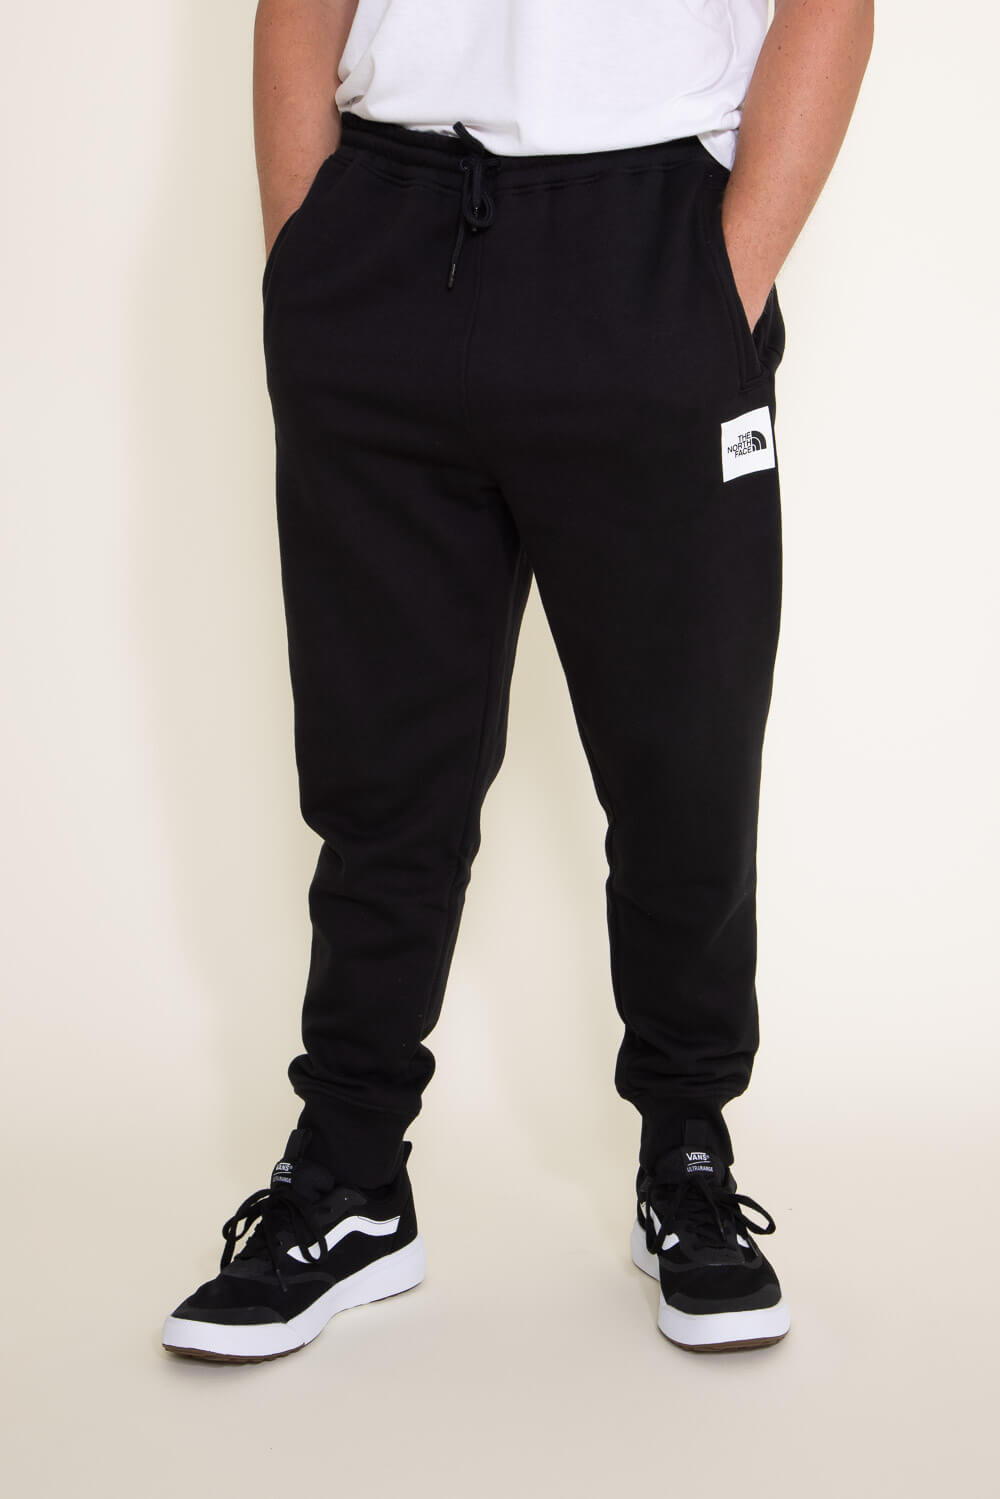 The North Face Jogger Athletic Pants for Women